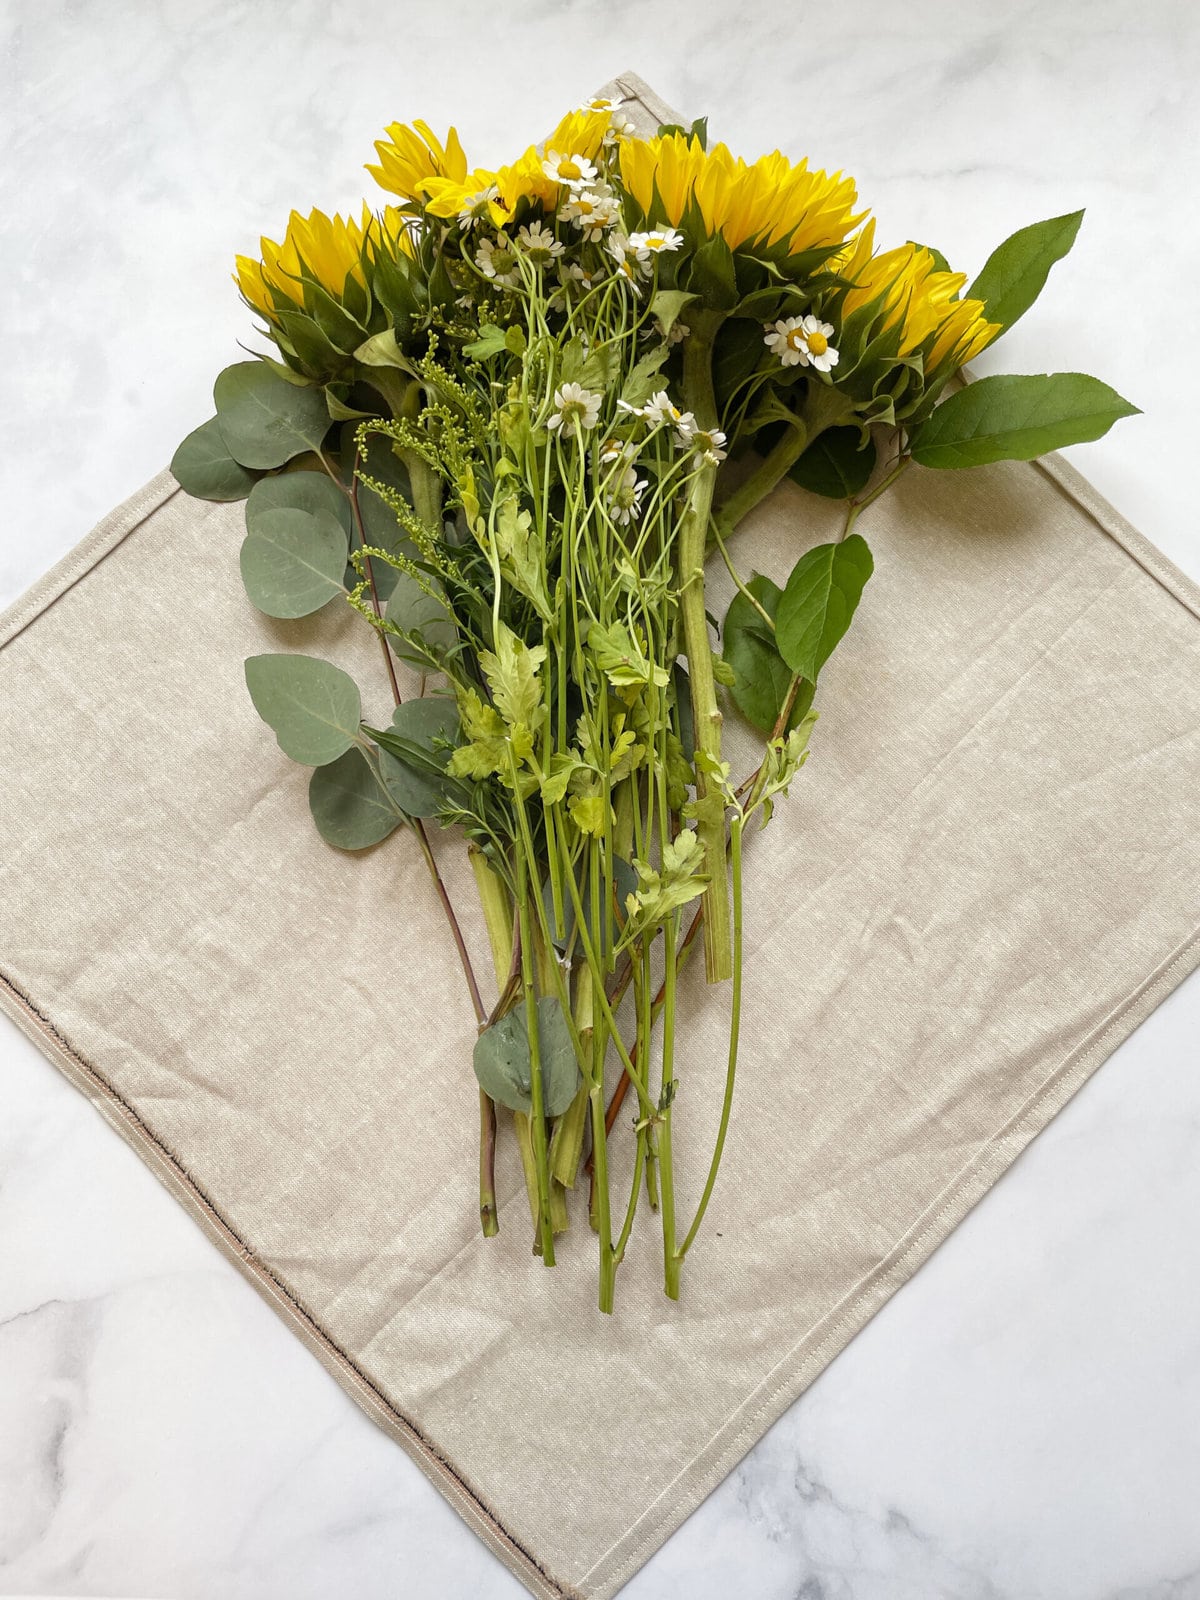 Burlap Bouquet Wrap Will Make Your Flowers Beautiful